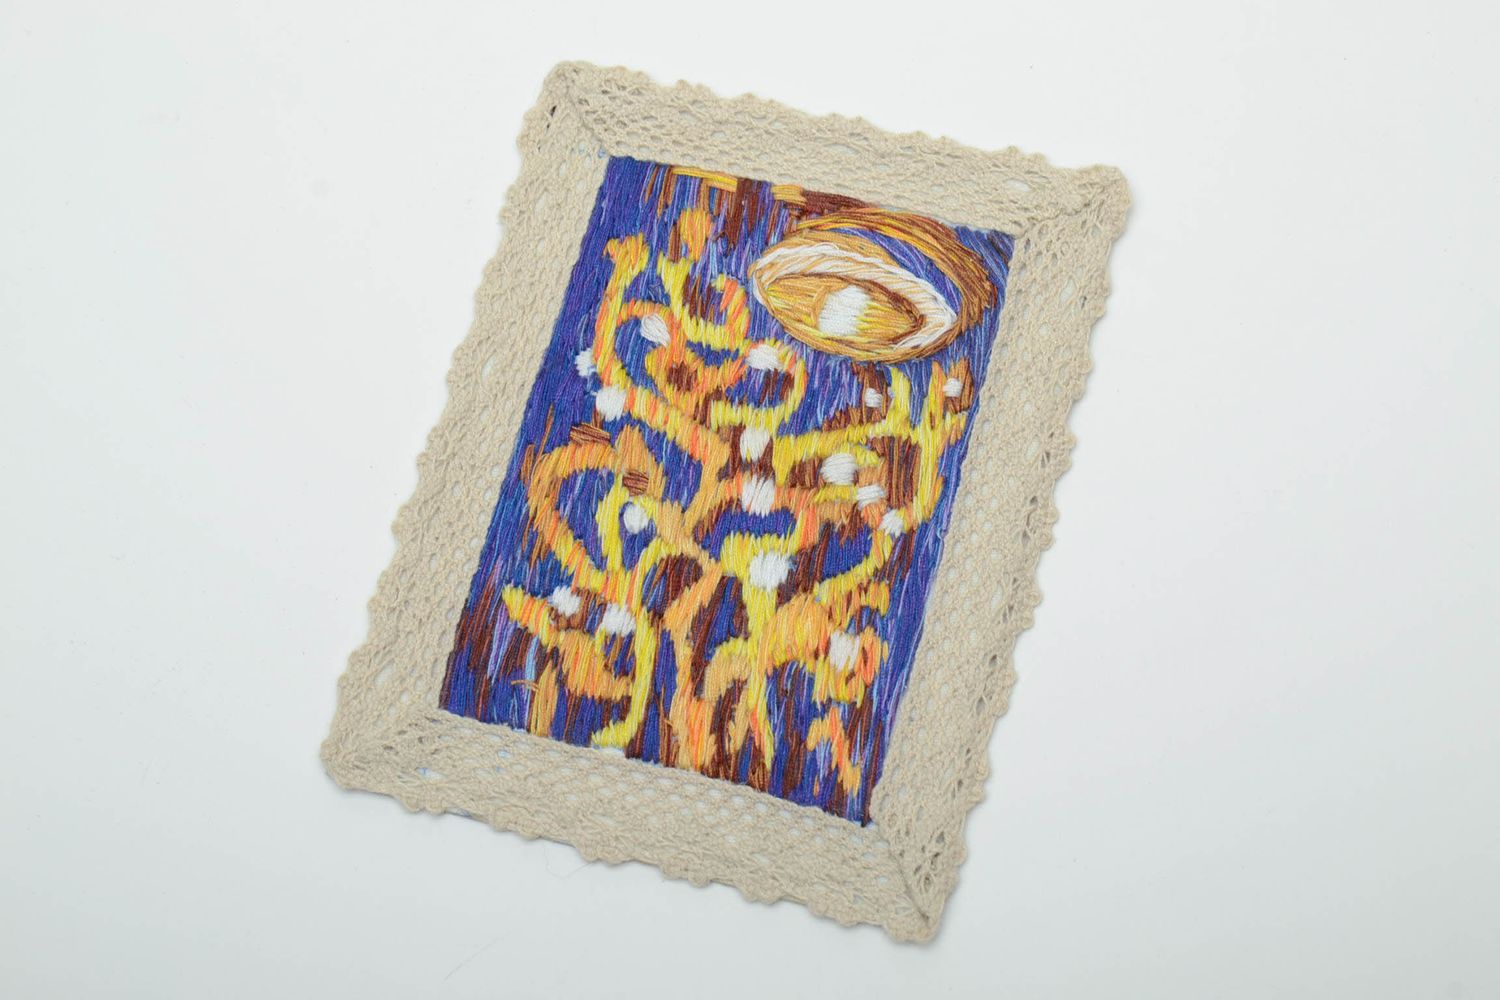 Satin stitch embroidered magnet picture photo 2